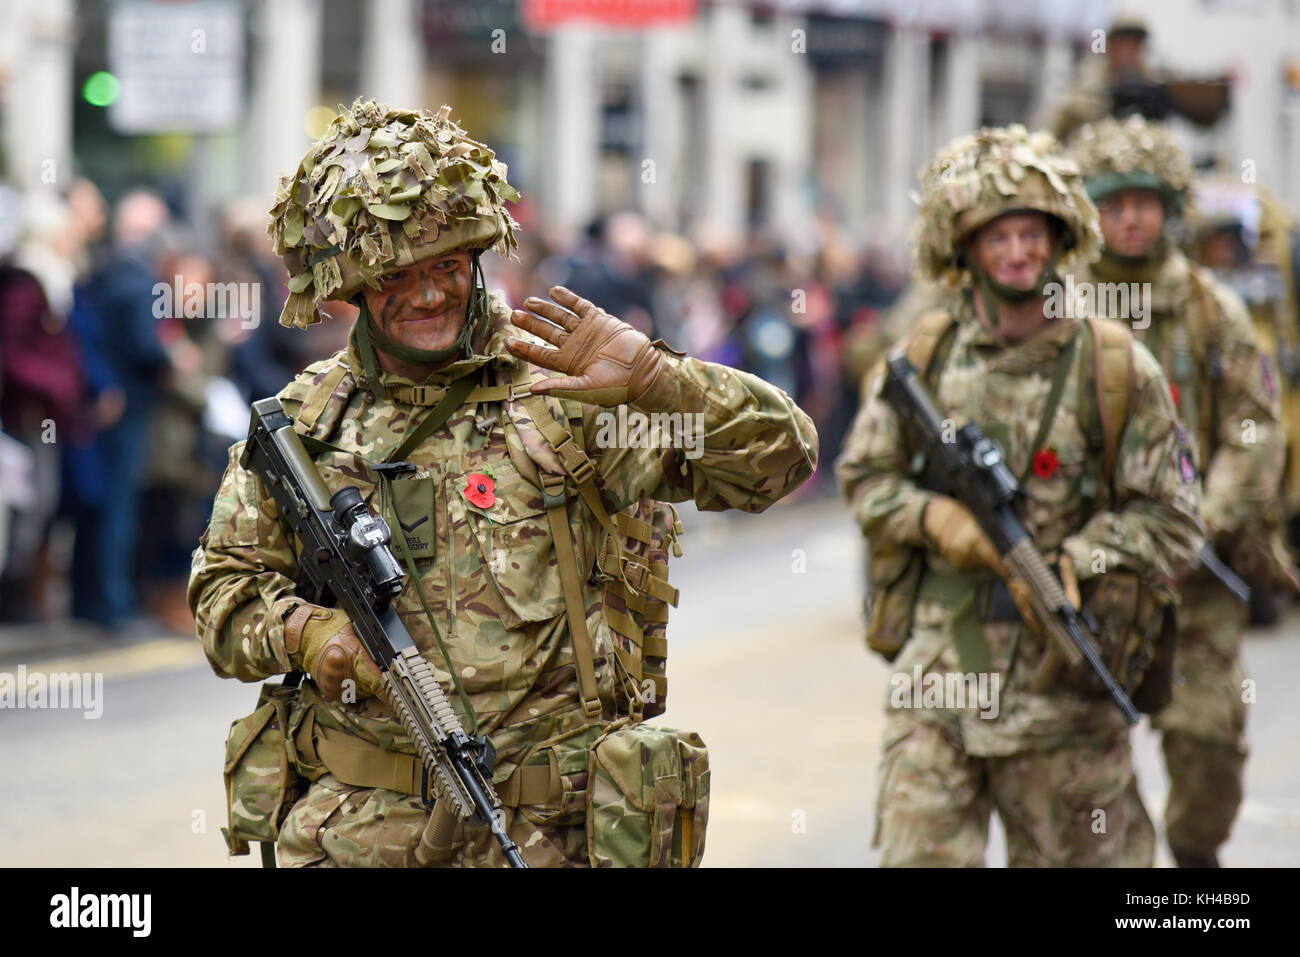 Royal Yeomanry Light Cavalry Army Reserve regiment at the Lord Mayor's Show Procession Parade along Cheapside, London. Crowds in the City Stock Photo